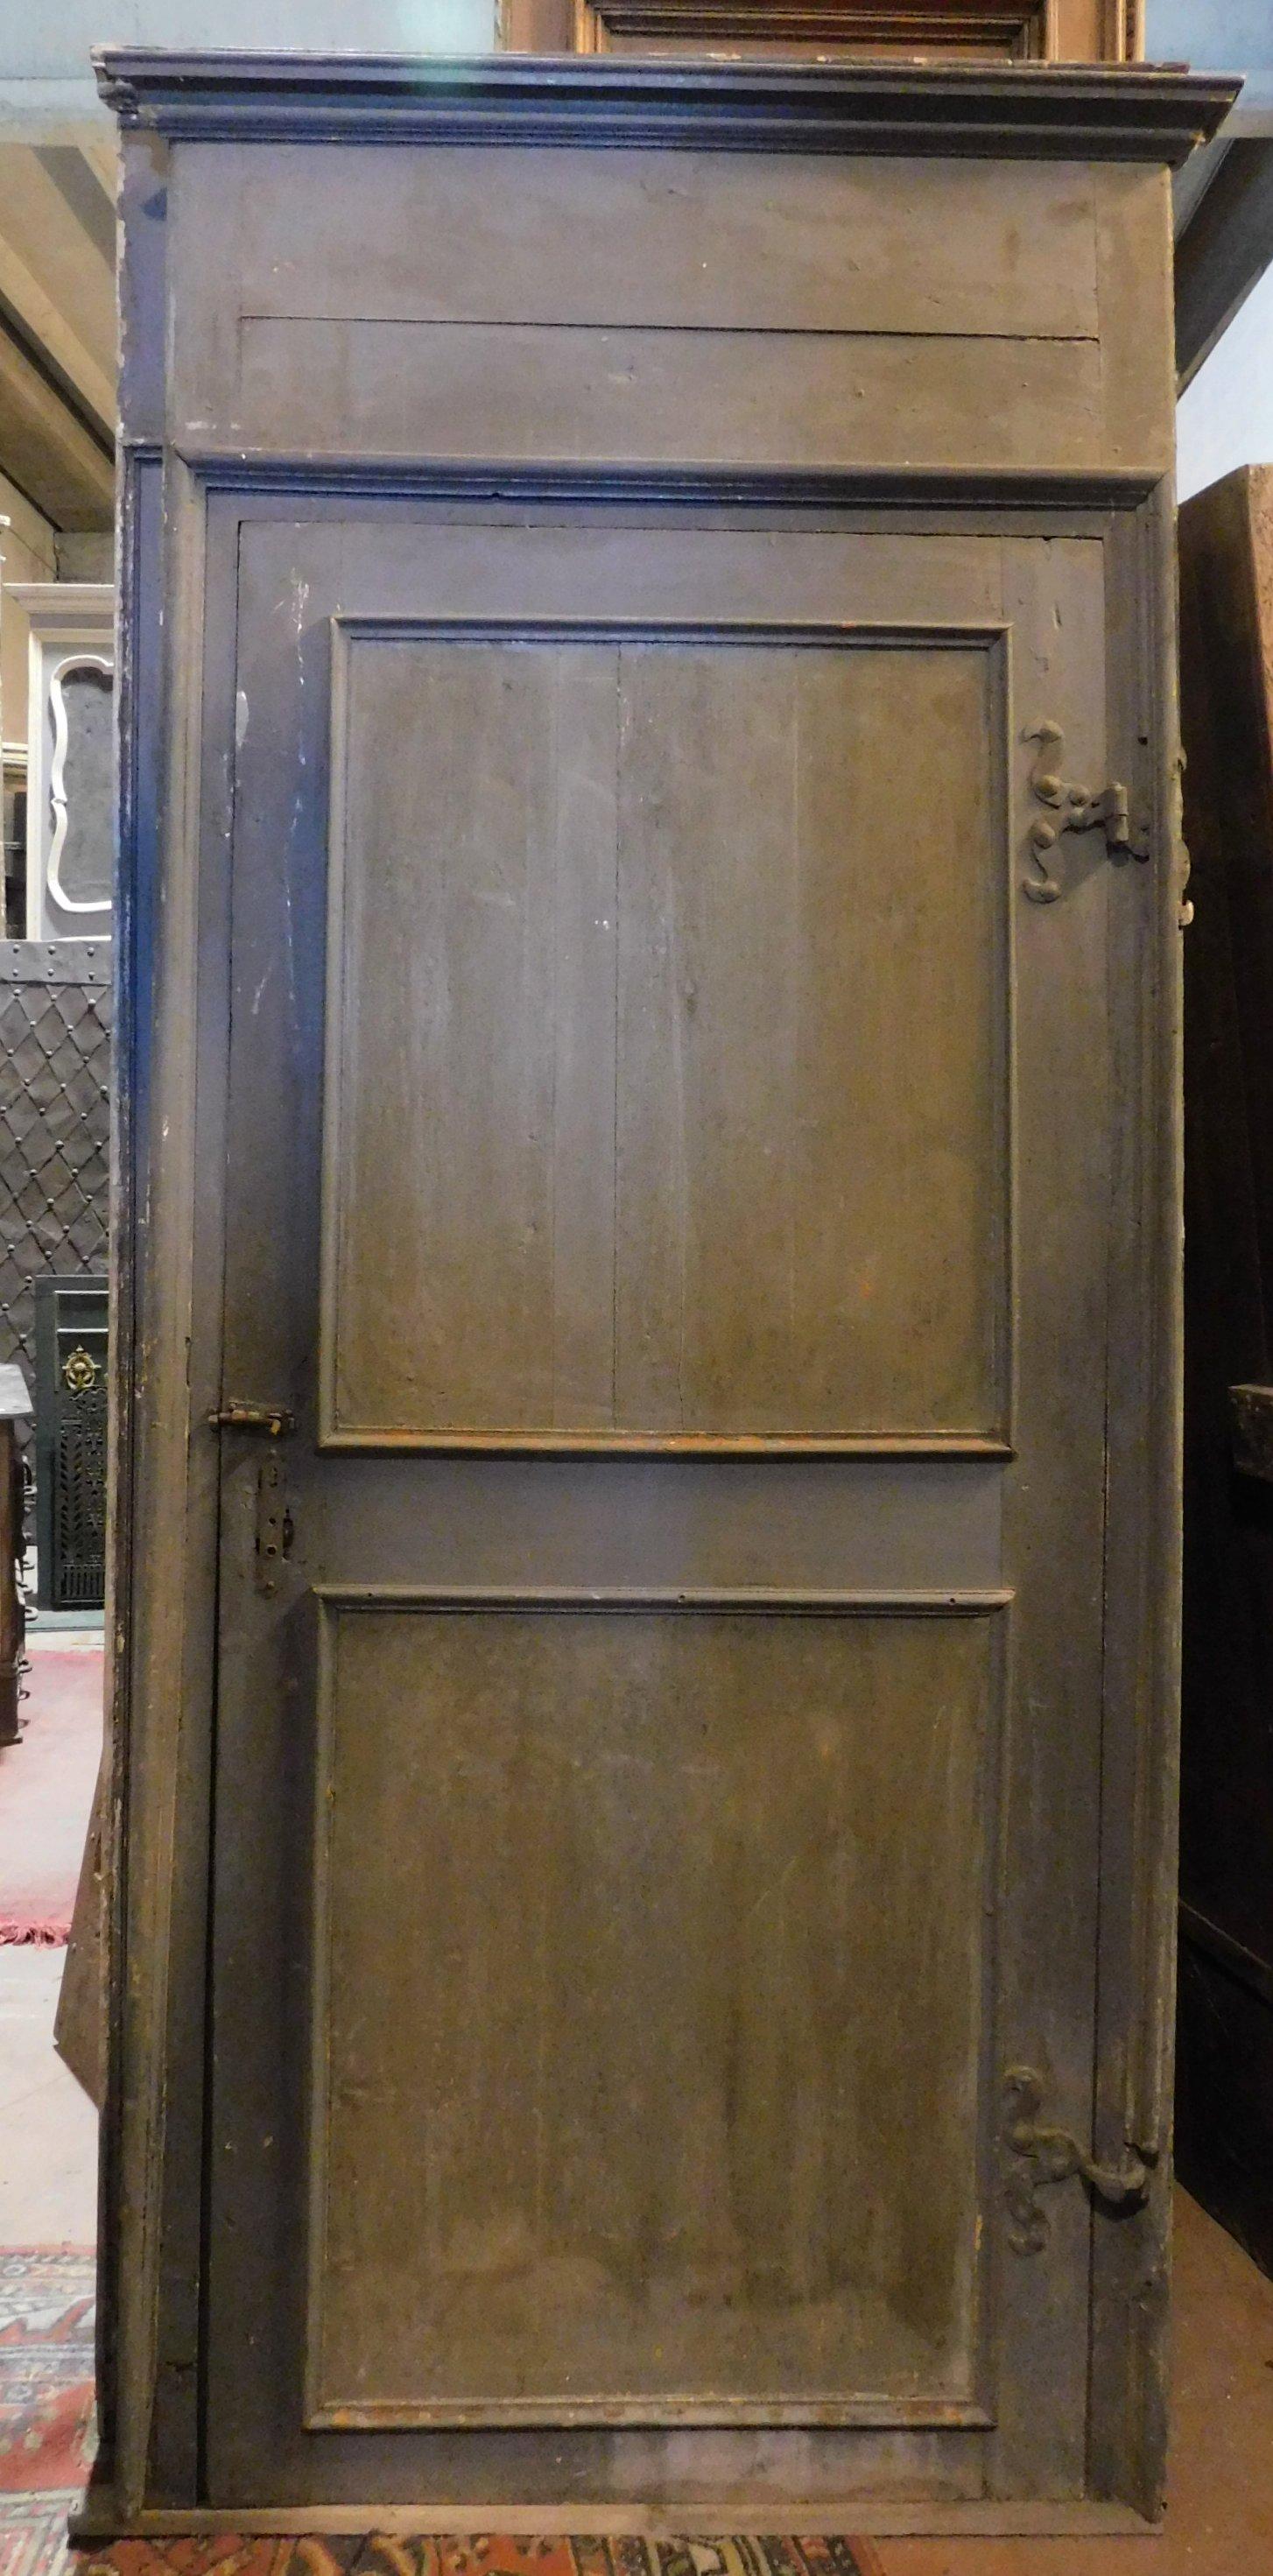 Pair of antique doors lacquered with patinated blue and grey colors, complete with original high frame, hand-built in the middle of the 18th century for a noble palace in northern Italy (Piedmont).
Different sizes, for this reason they can be sold